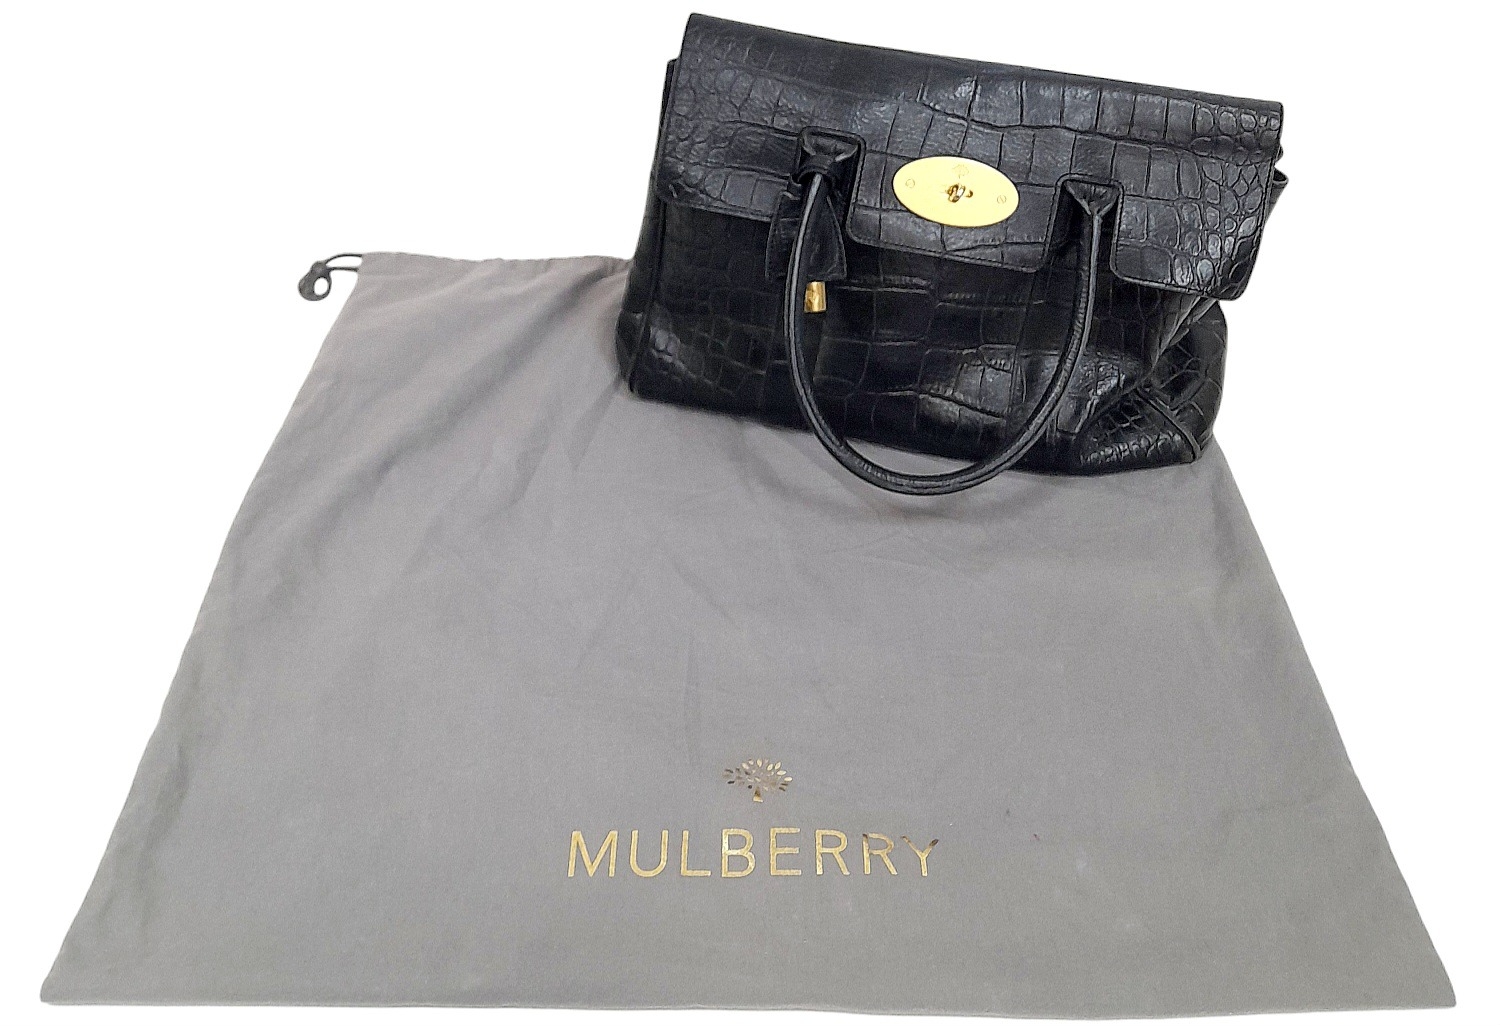 A Mulberry Bayswater Handbag. Black Croc Embossed Leather exterior, gold-tone hardware, a clochette, - Image 7 of 7